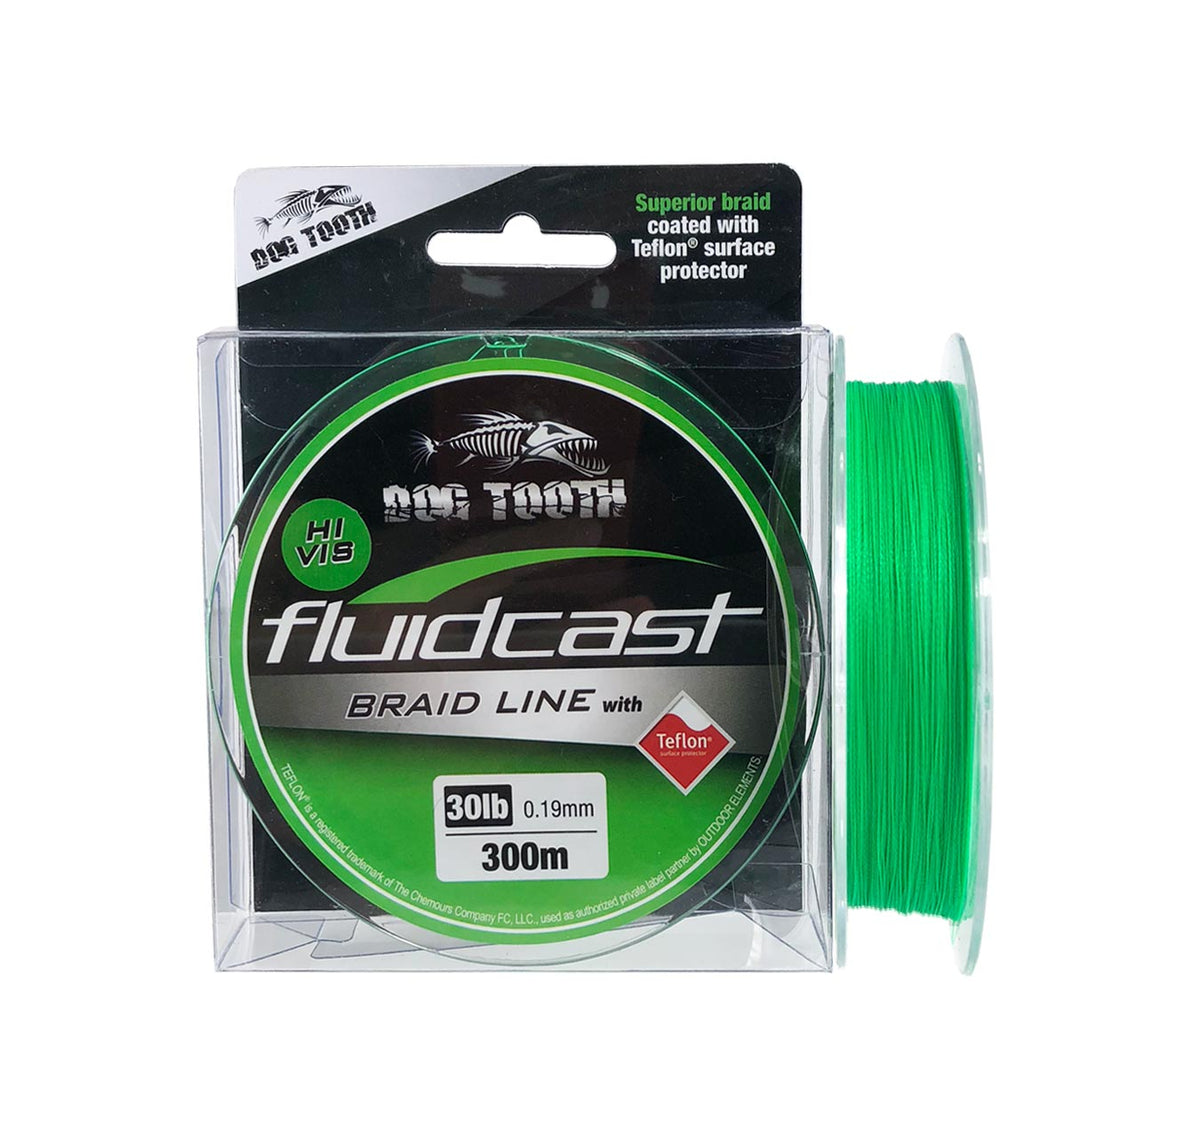 Dog Tooth Fluidcast X4 Braided Fishing Line Hi Vis Green 300m